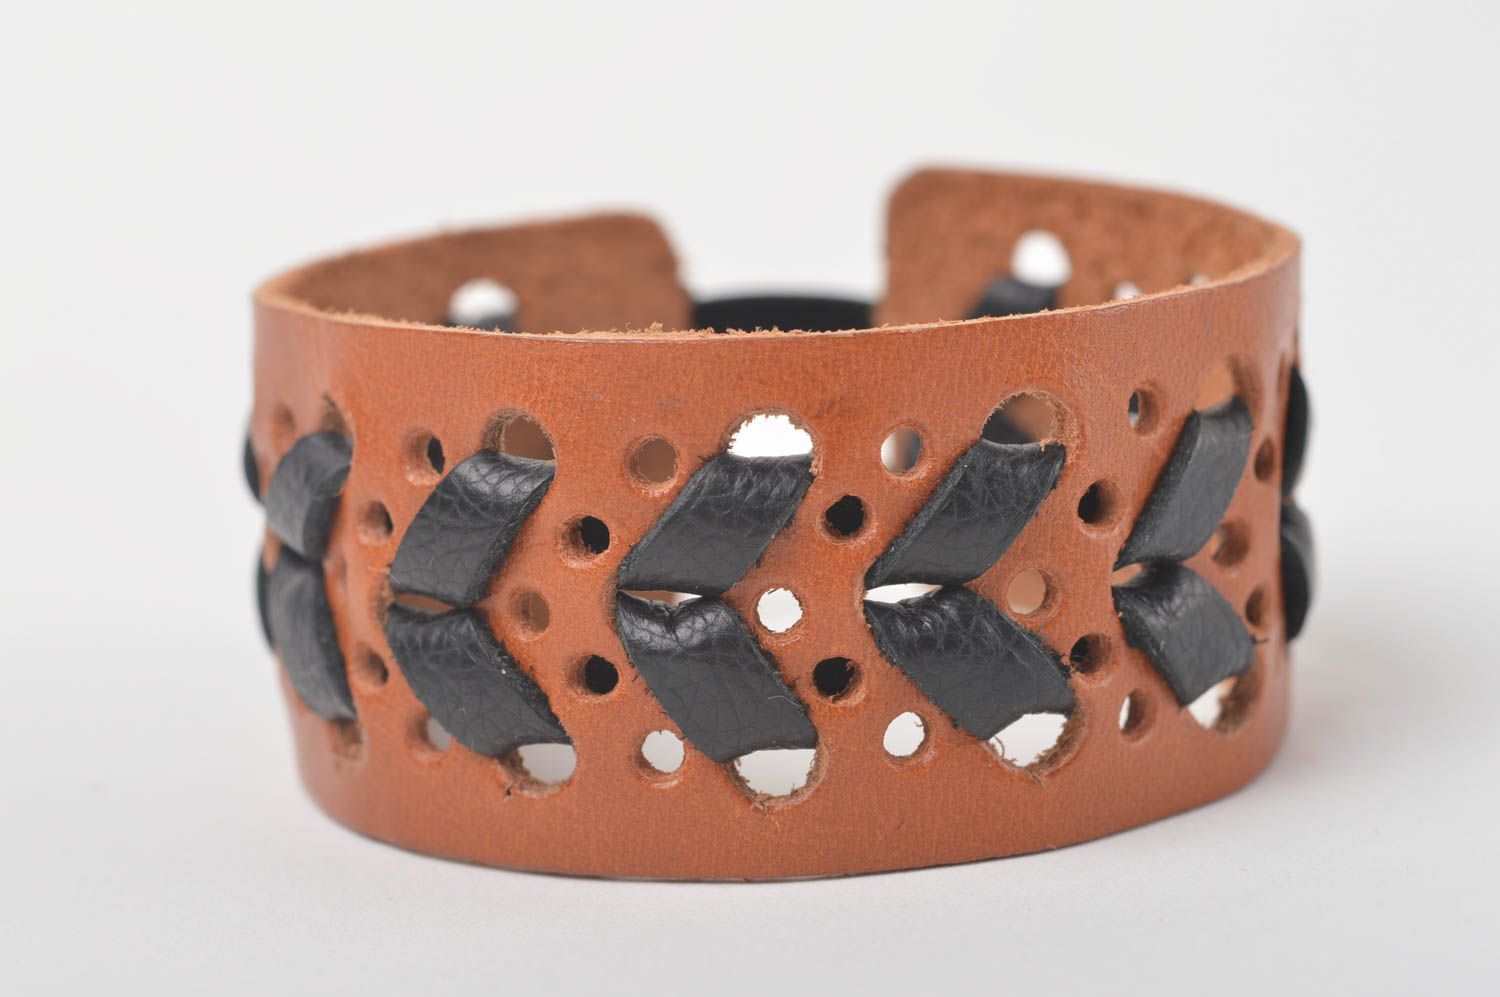 Beautiful handmade leather bracelet designs cool jewelry designs gifts for her photo 2